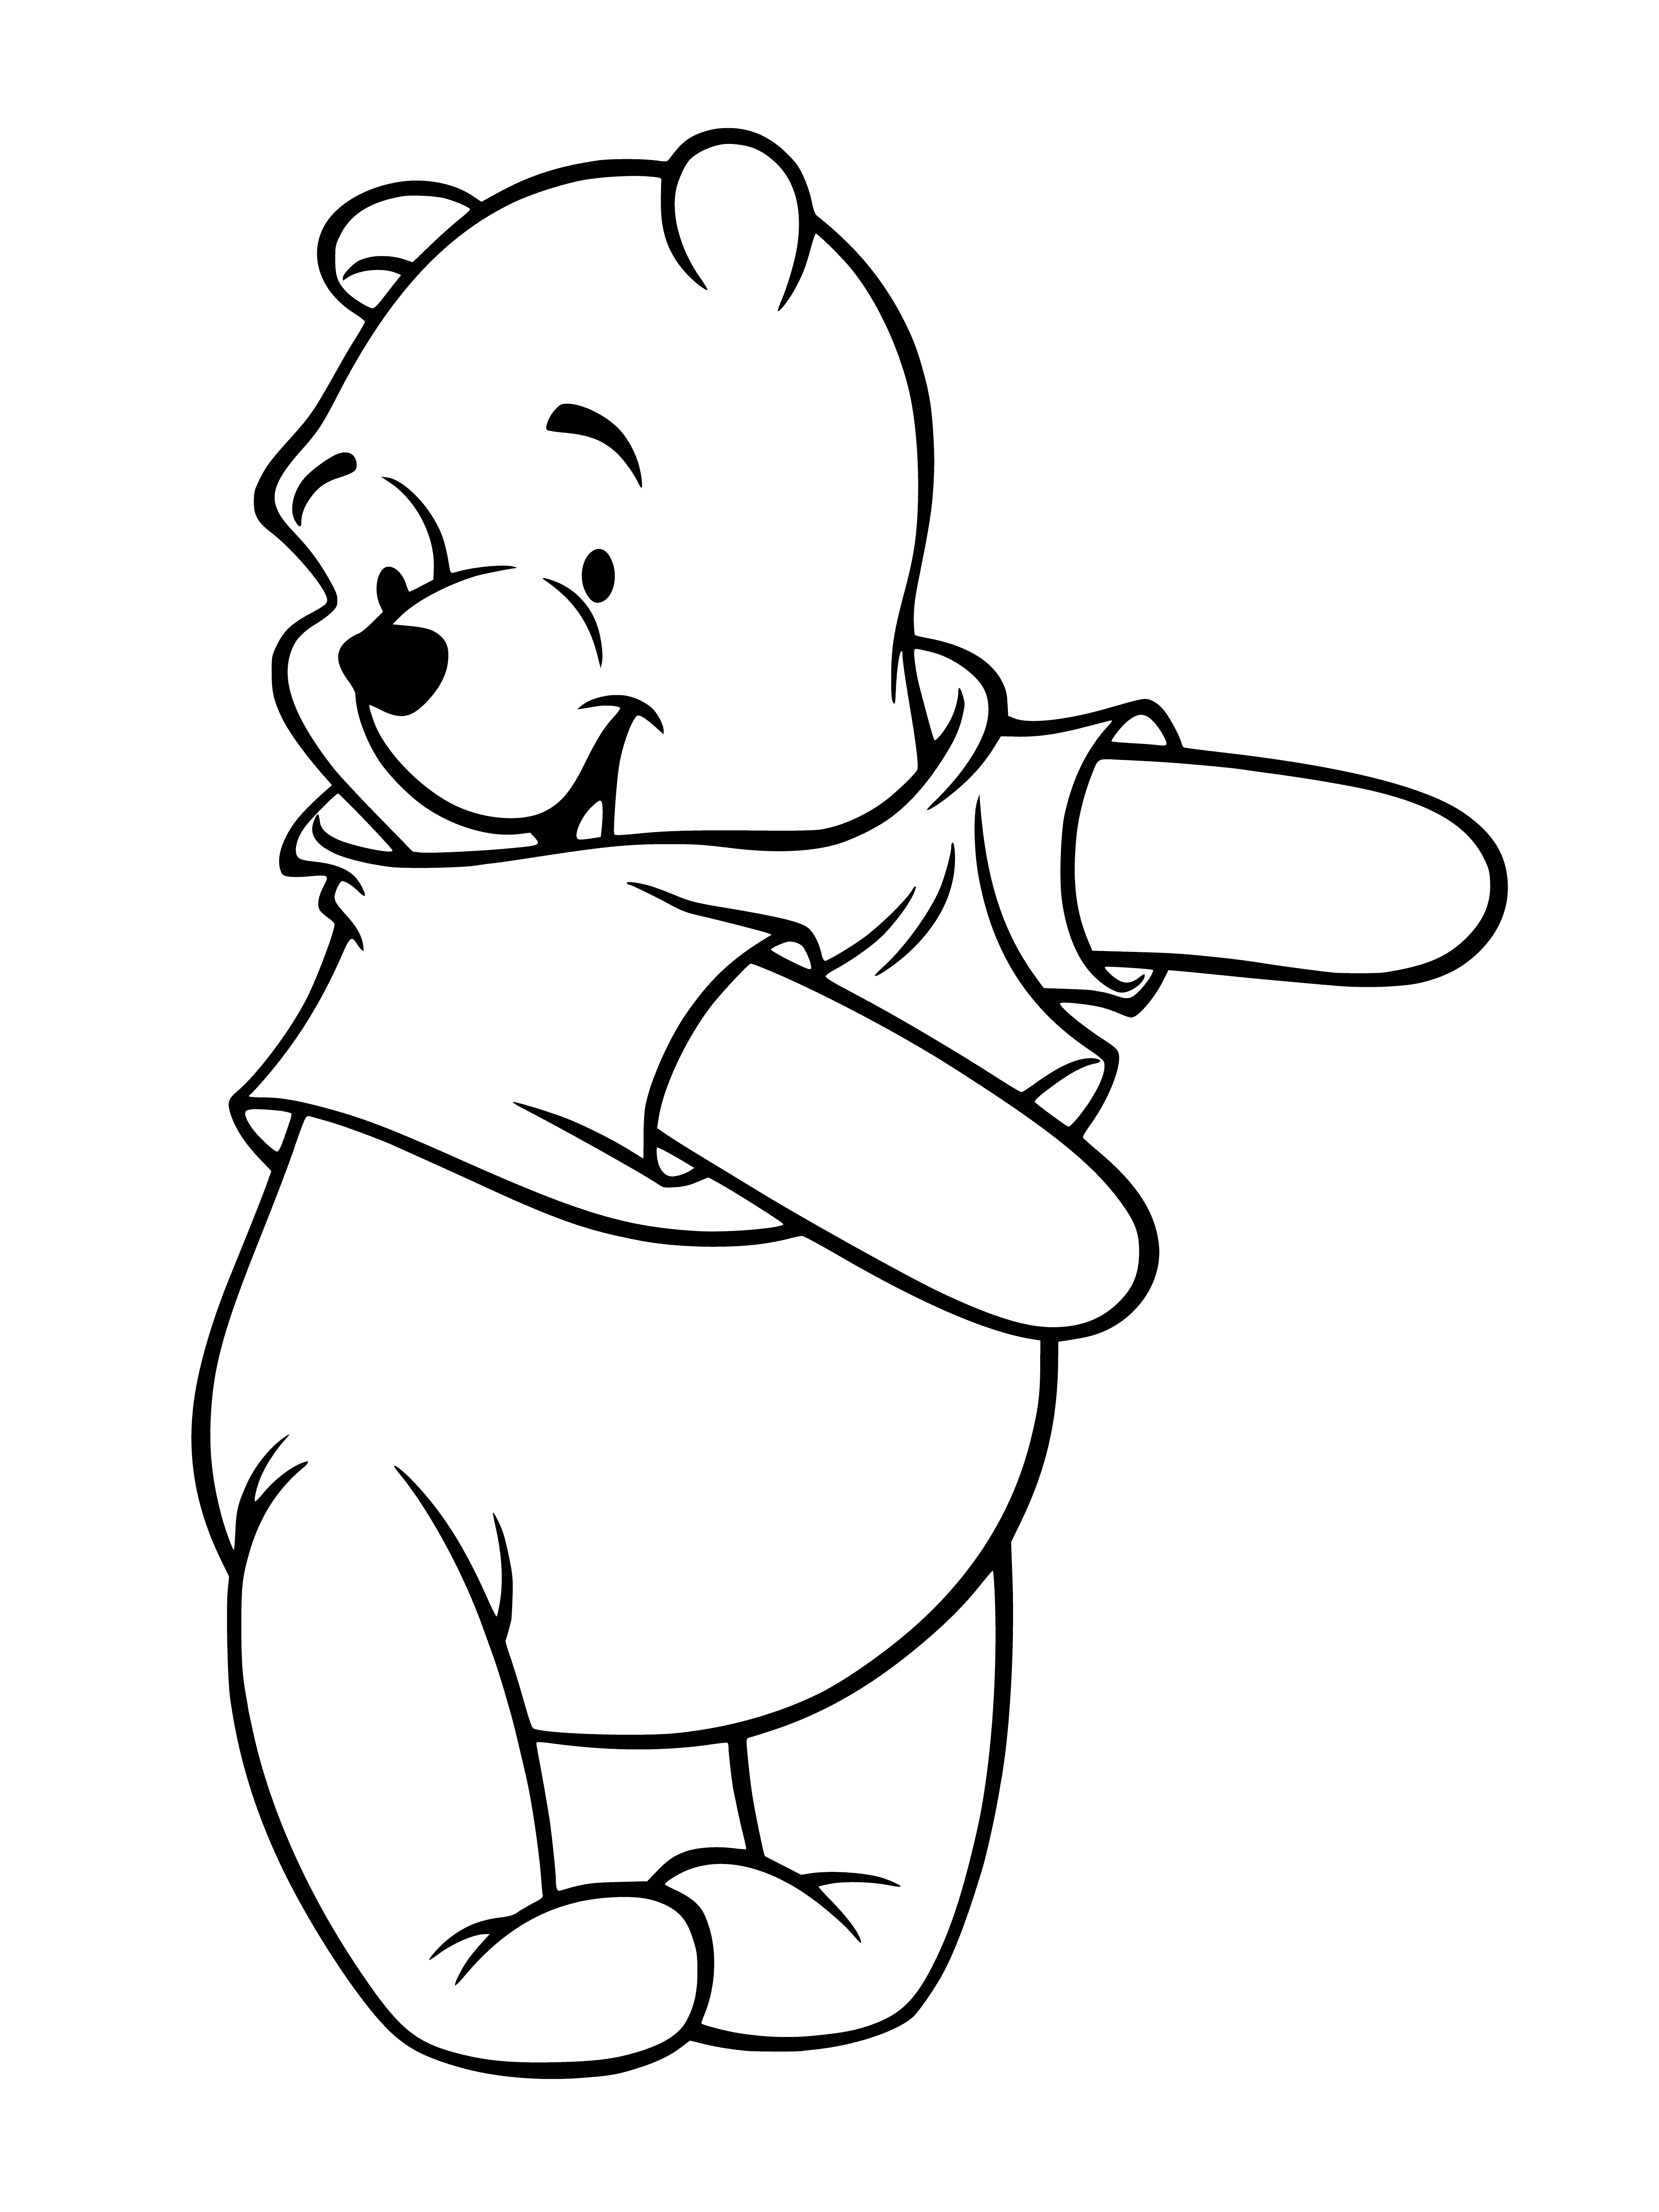 coloring page: A bear in red is eating honey from a spoon while chilling in a chair with his feet up on a stool.